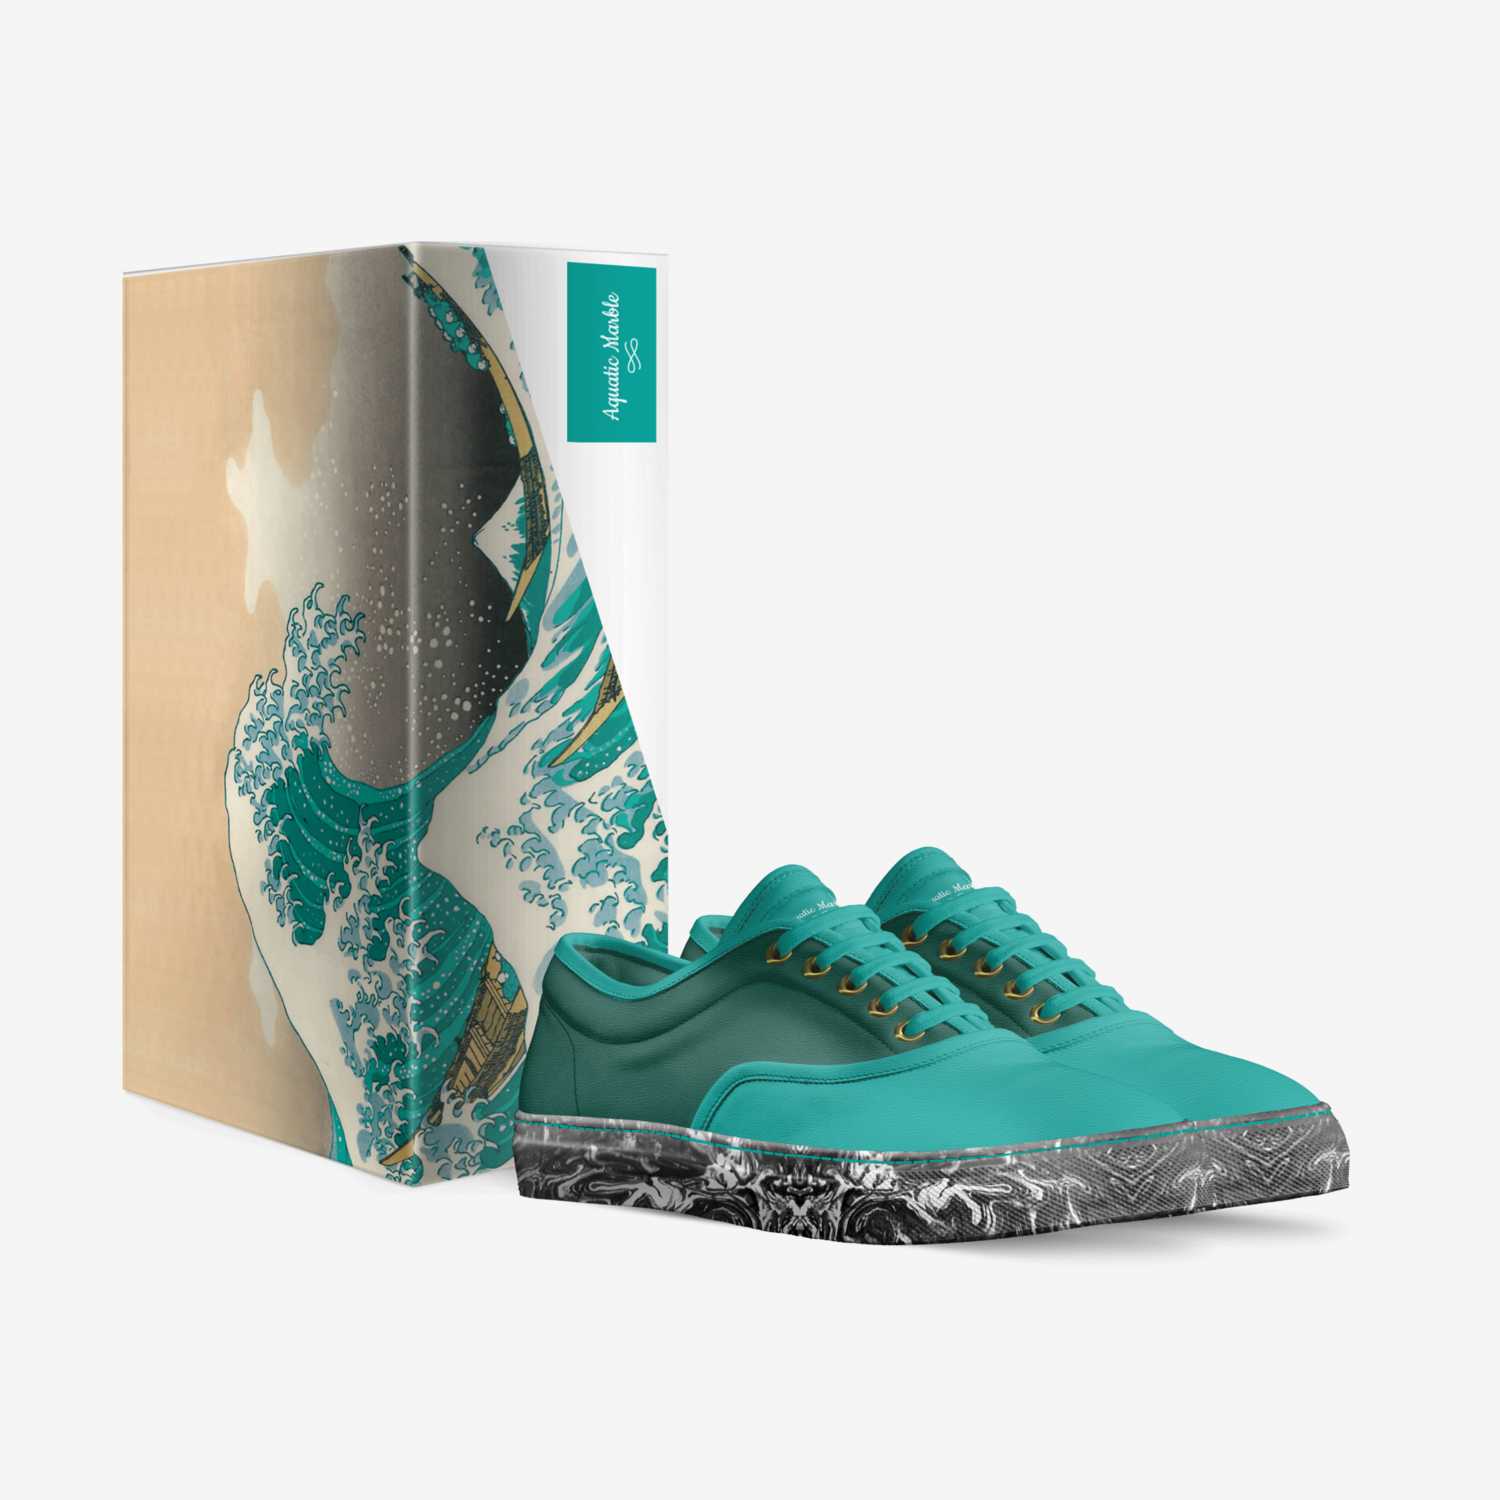 Aquatic Marble custom made in Italy shoes by Omar Njai | Box view